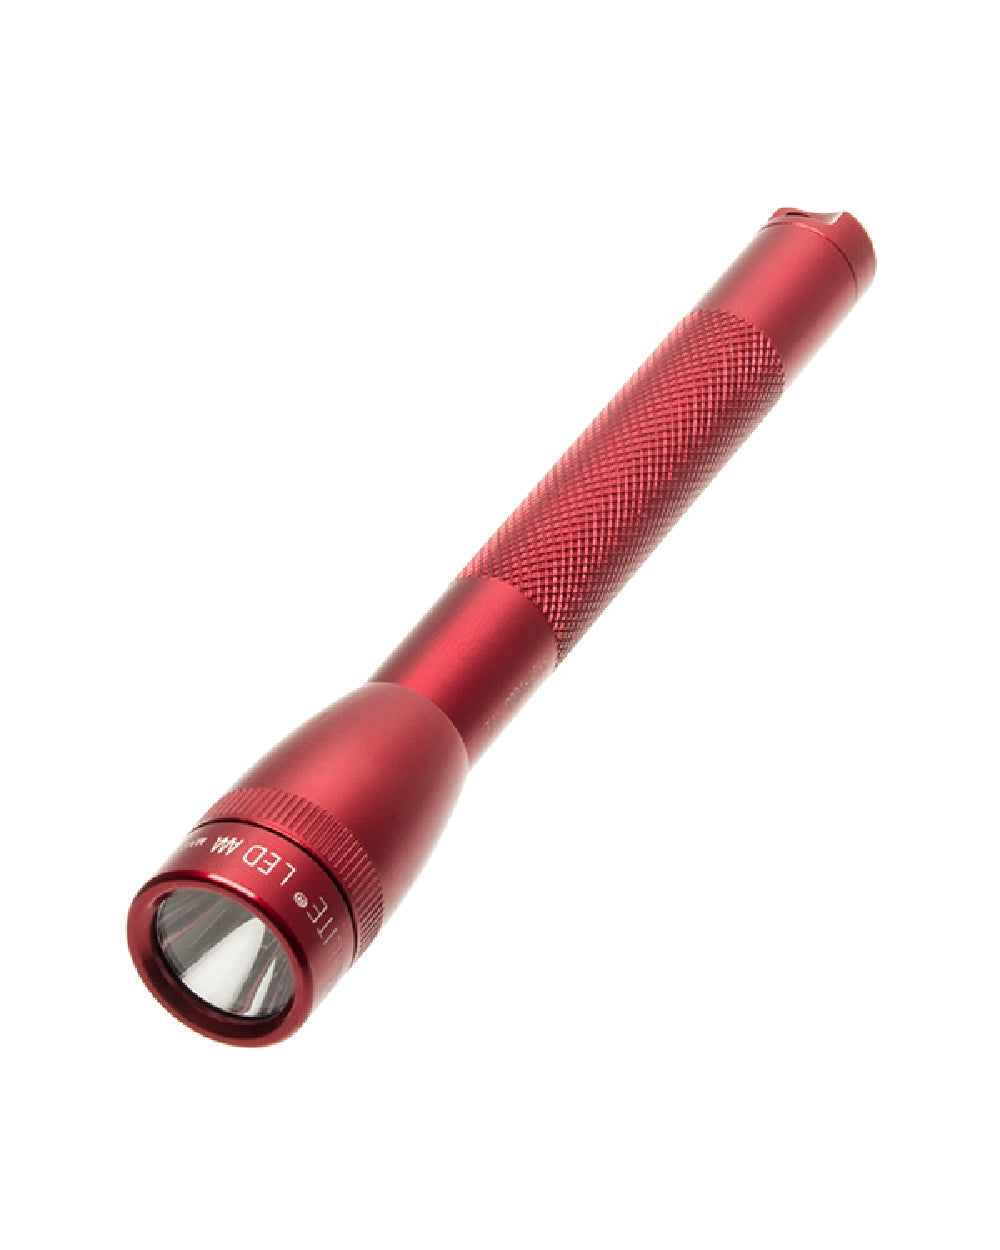 Maglite Mini 2-Cell AAA LED Torch in Red 